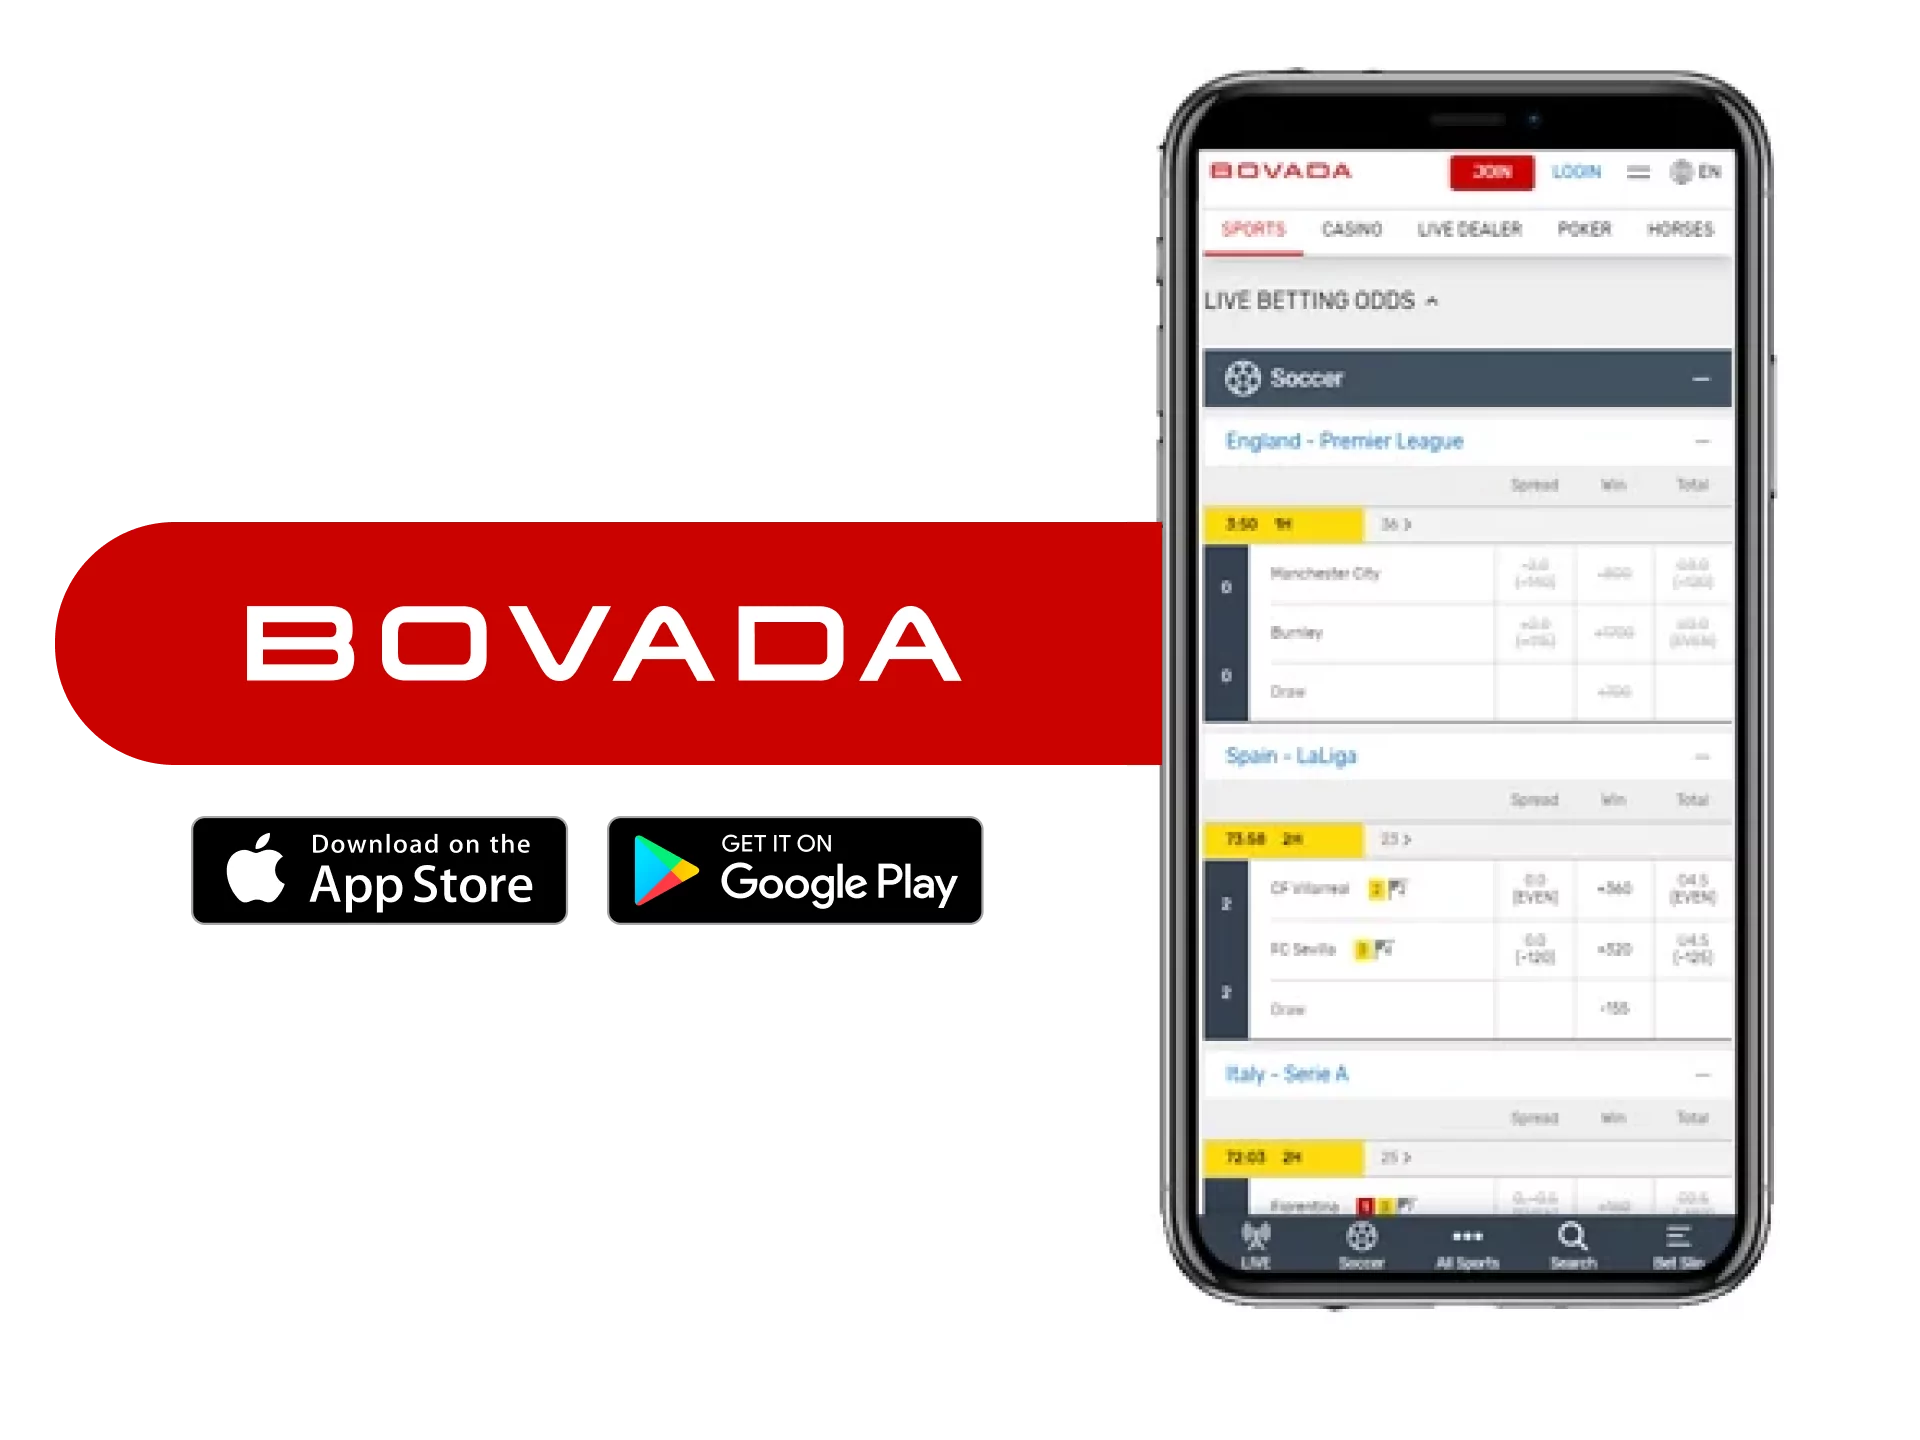 Bovada betting site with one of the best design when compared to other bookmakers.